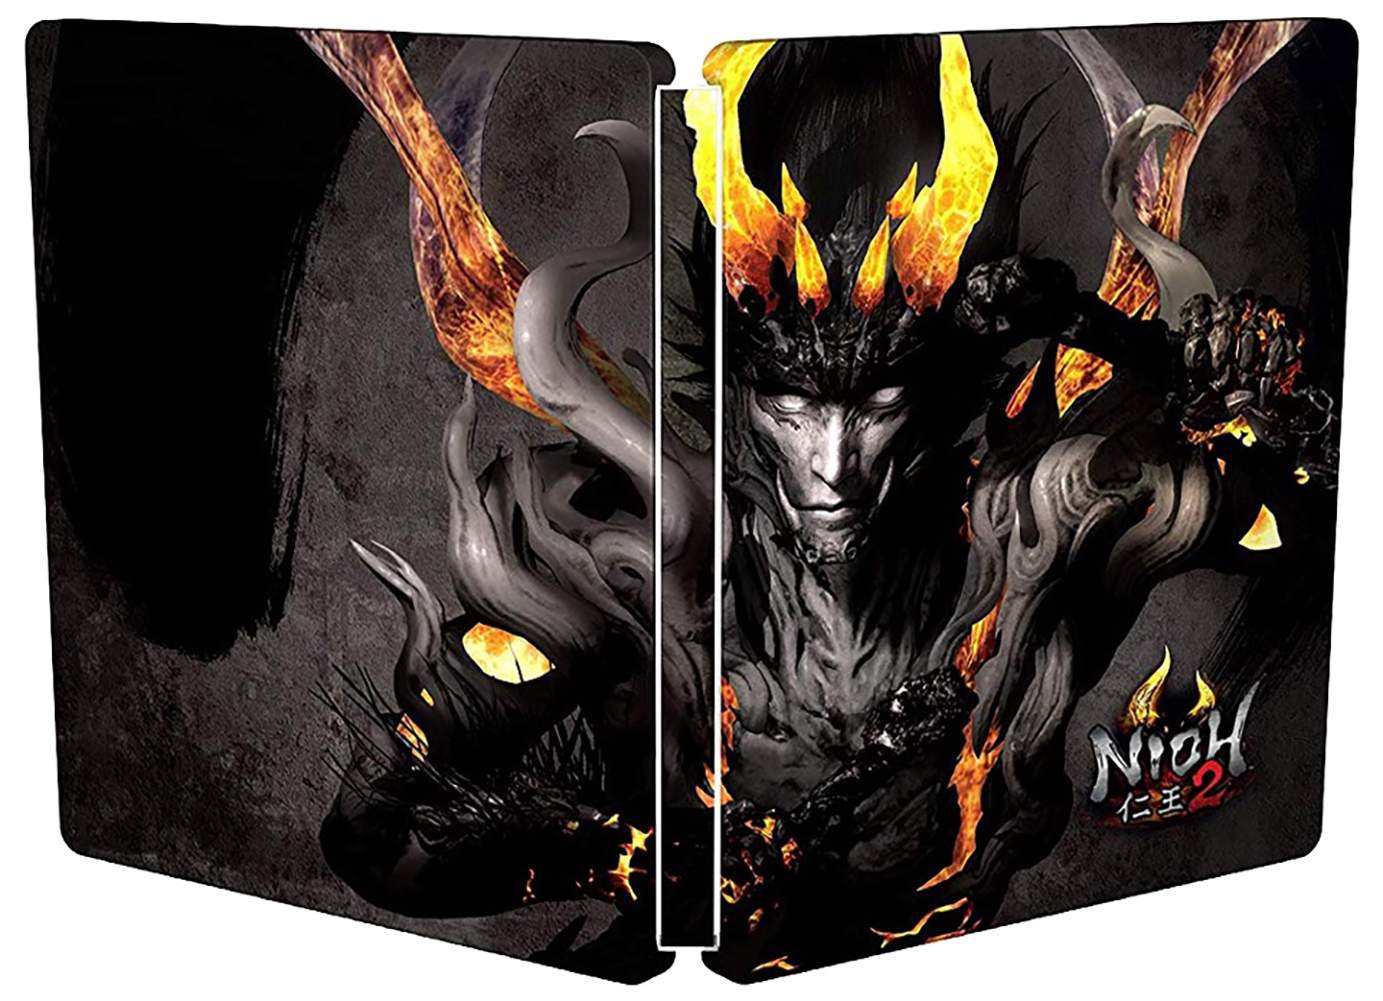 Brand New Sealed Official Nioh 2 - Limitiertes Steelbook [PlayStation4] No Game For SONY